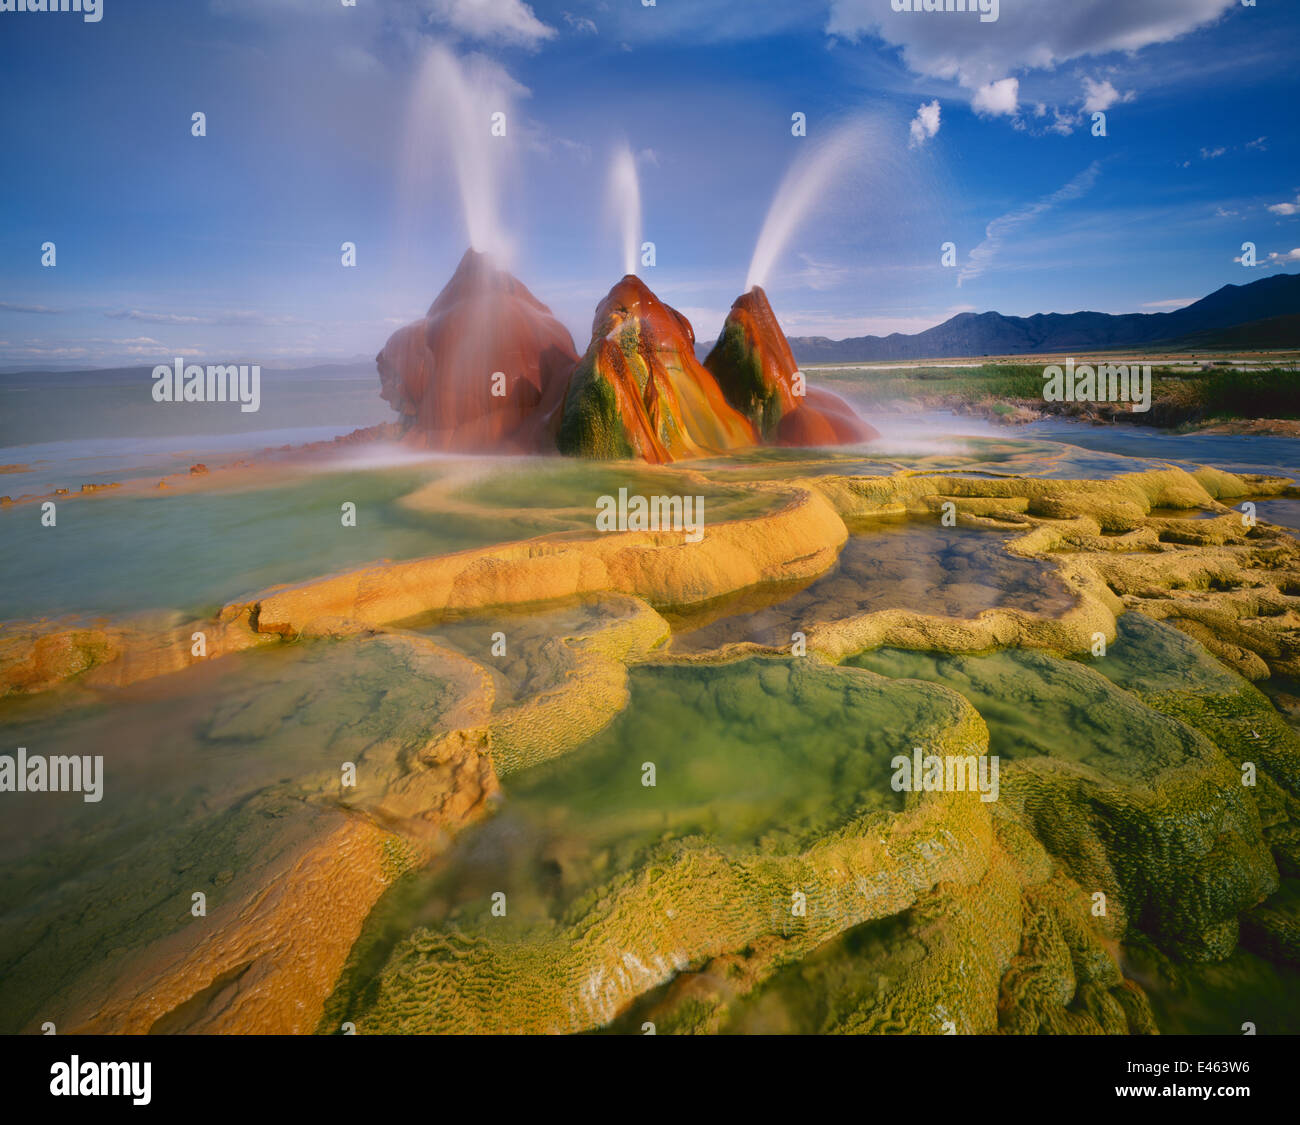 Scalding hot water continuously spouting behind layers of mineral deposits, Fly Geyser, Black Rock Desert, Great Basin Desert, Nevada, USA Stock Photo